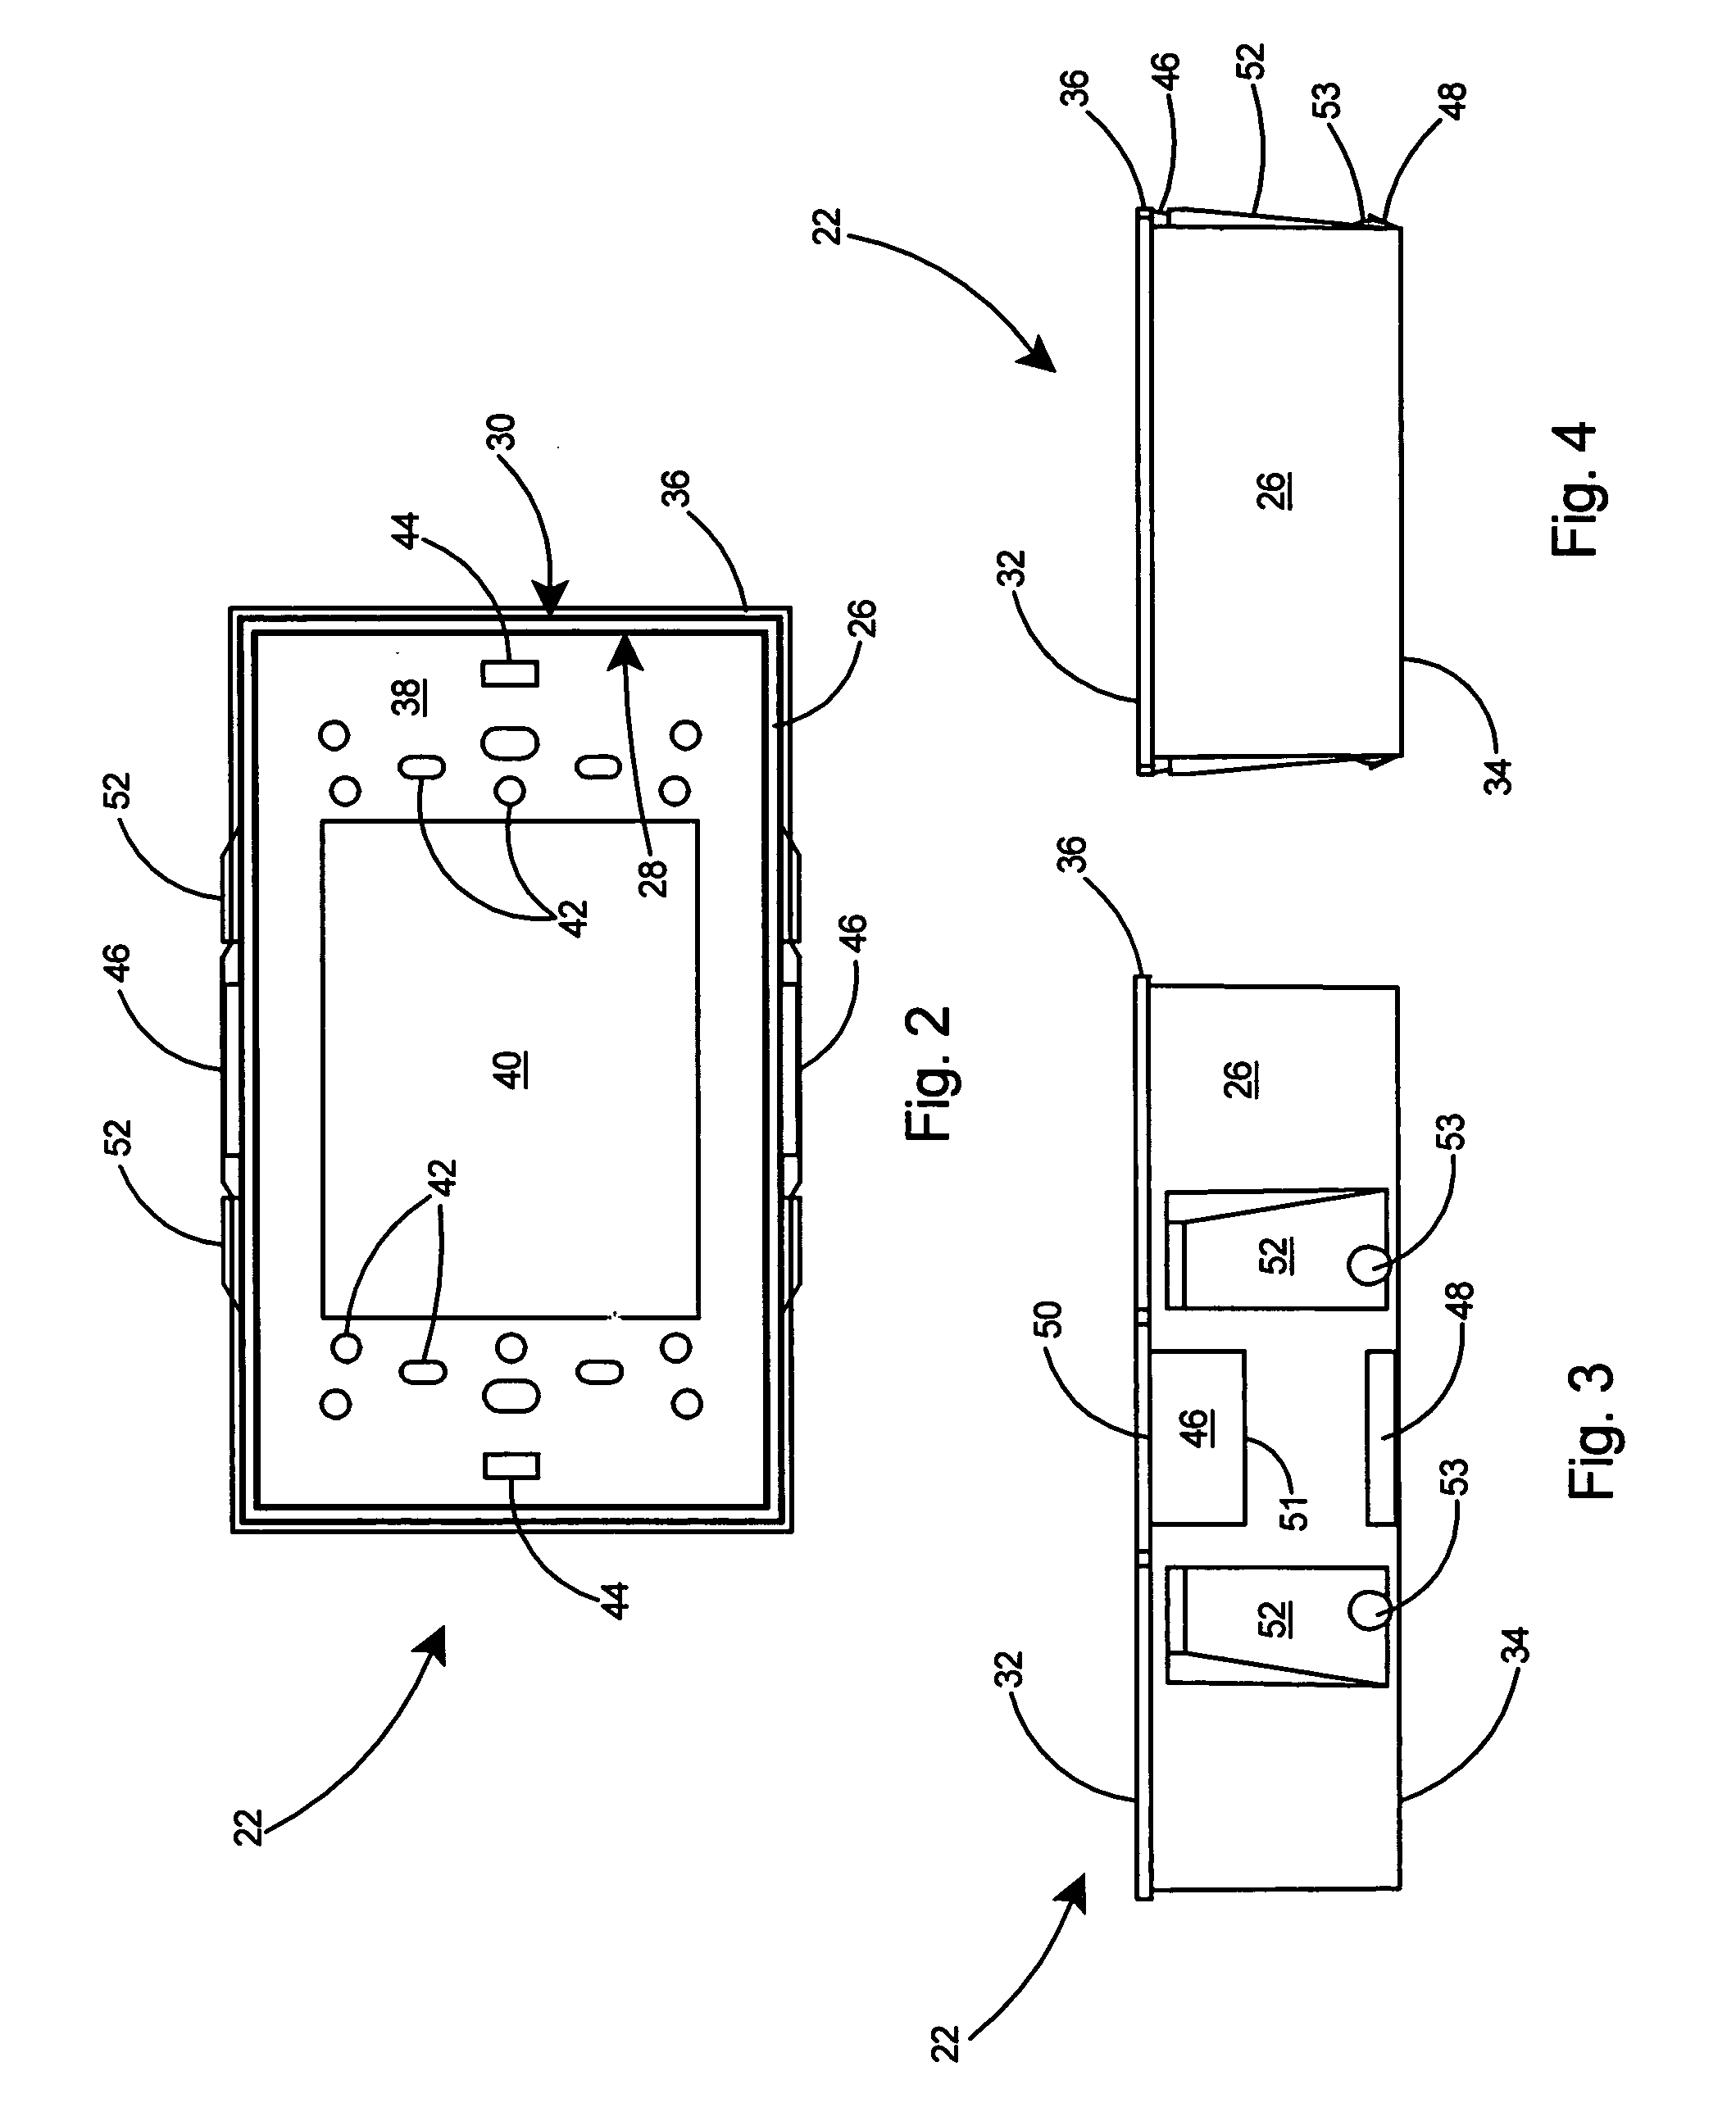 Adjustable two-tier cover assembly for an electrical box